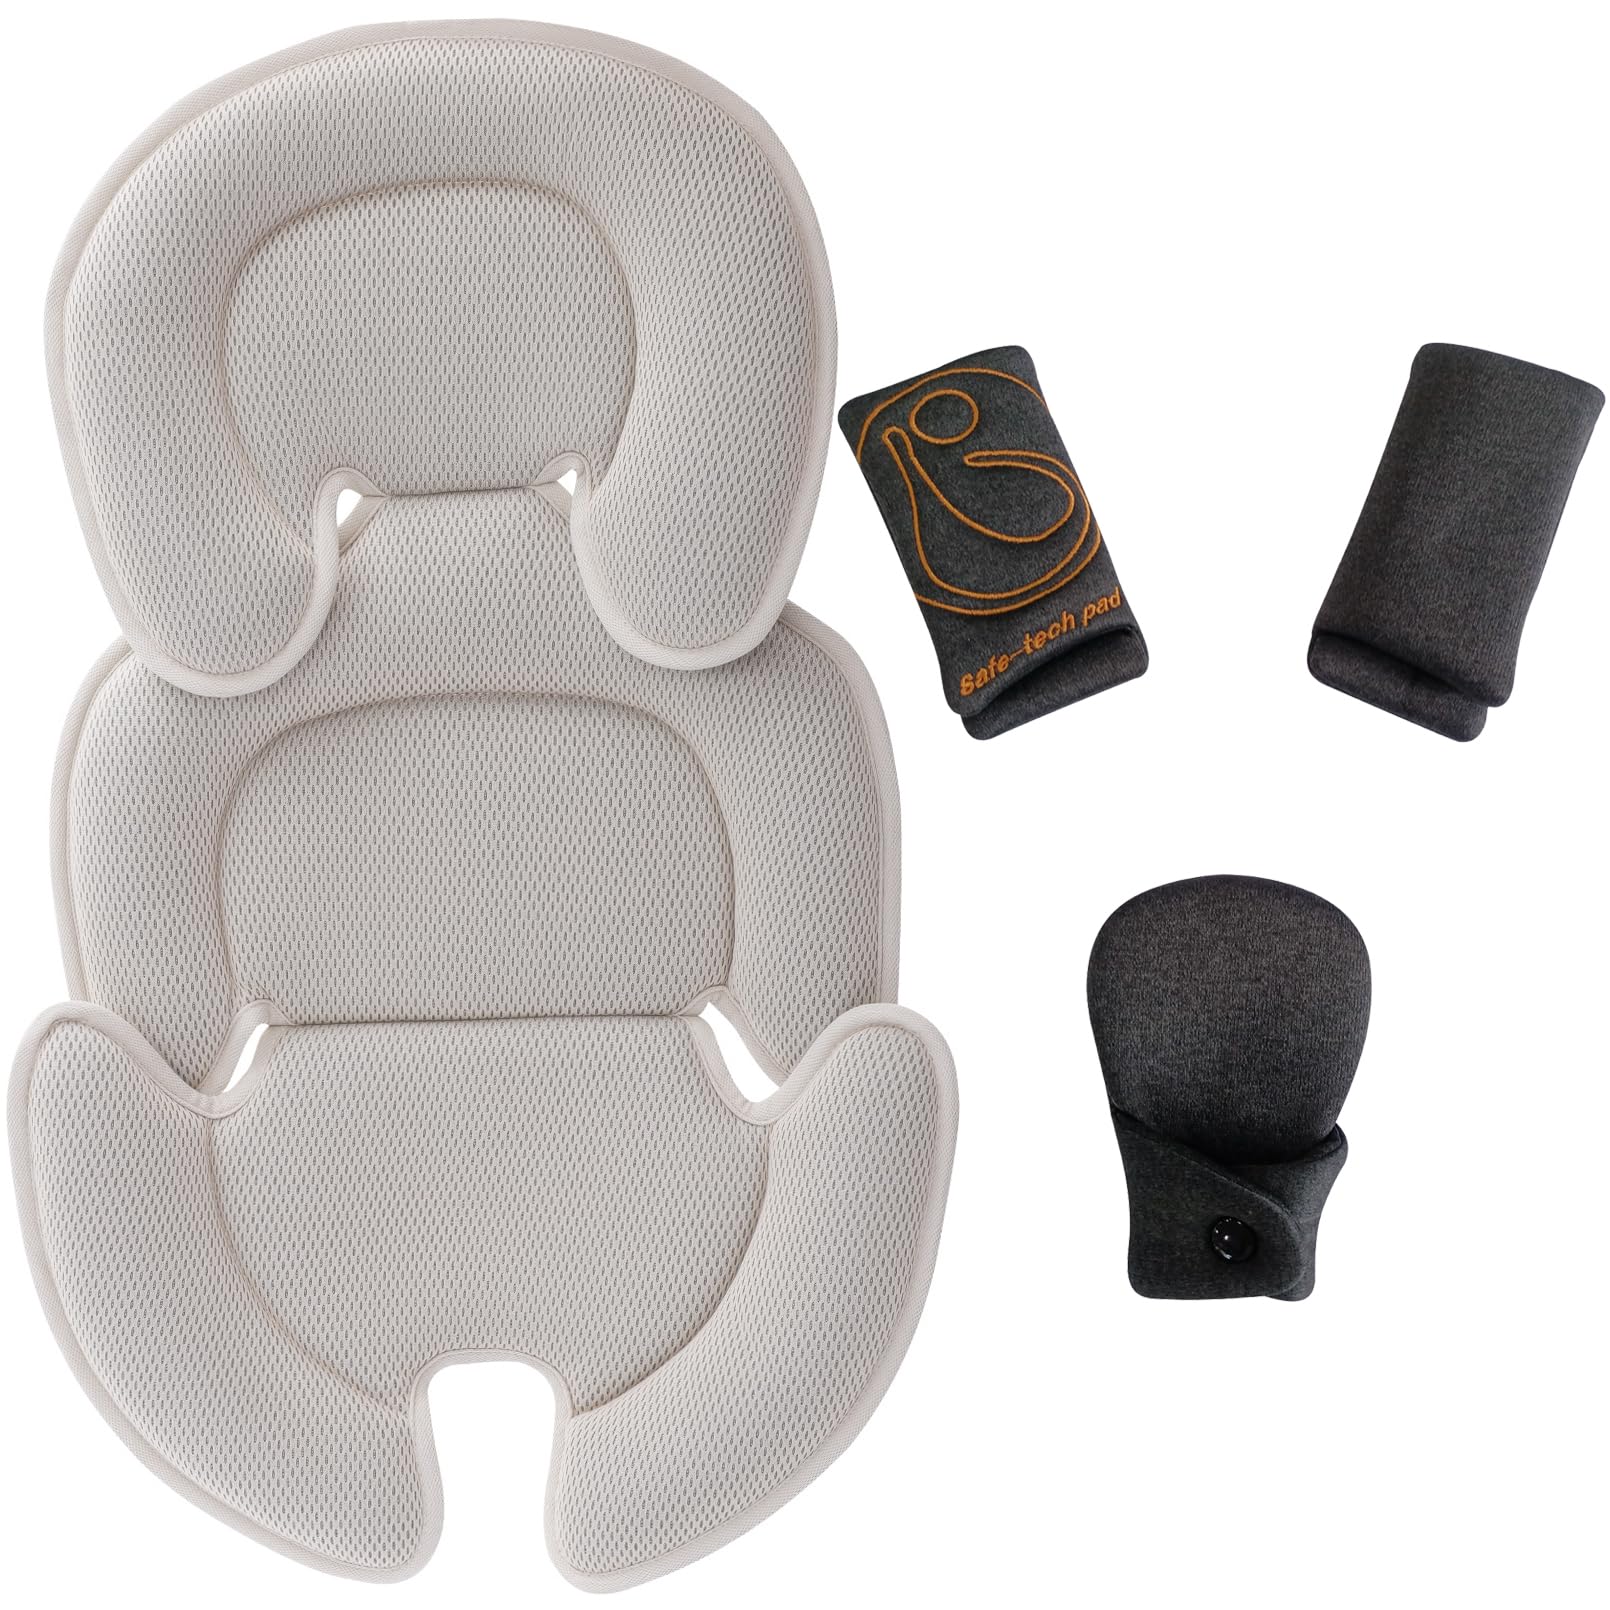 Innokids Head and Body Support Pillow and Car Seat Strap Cover Set